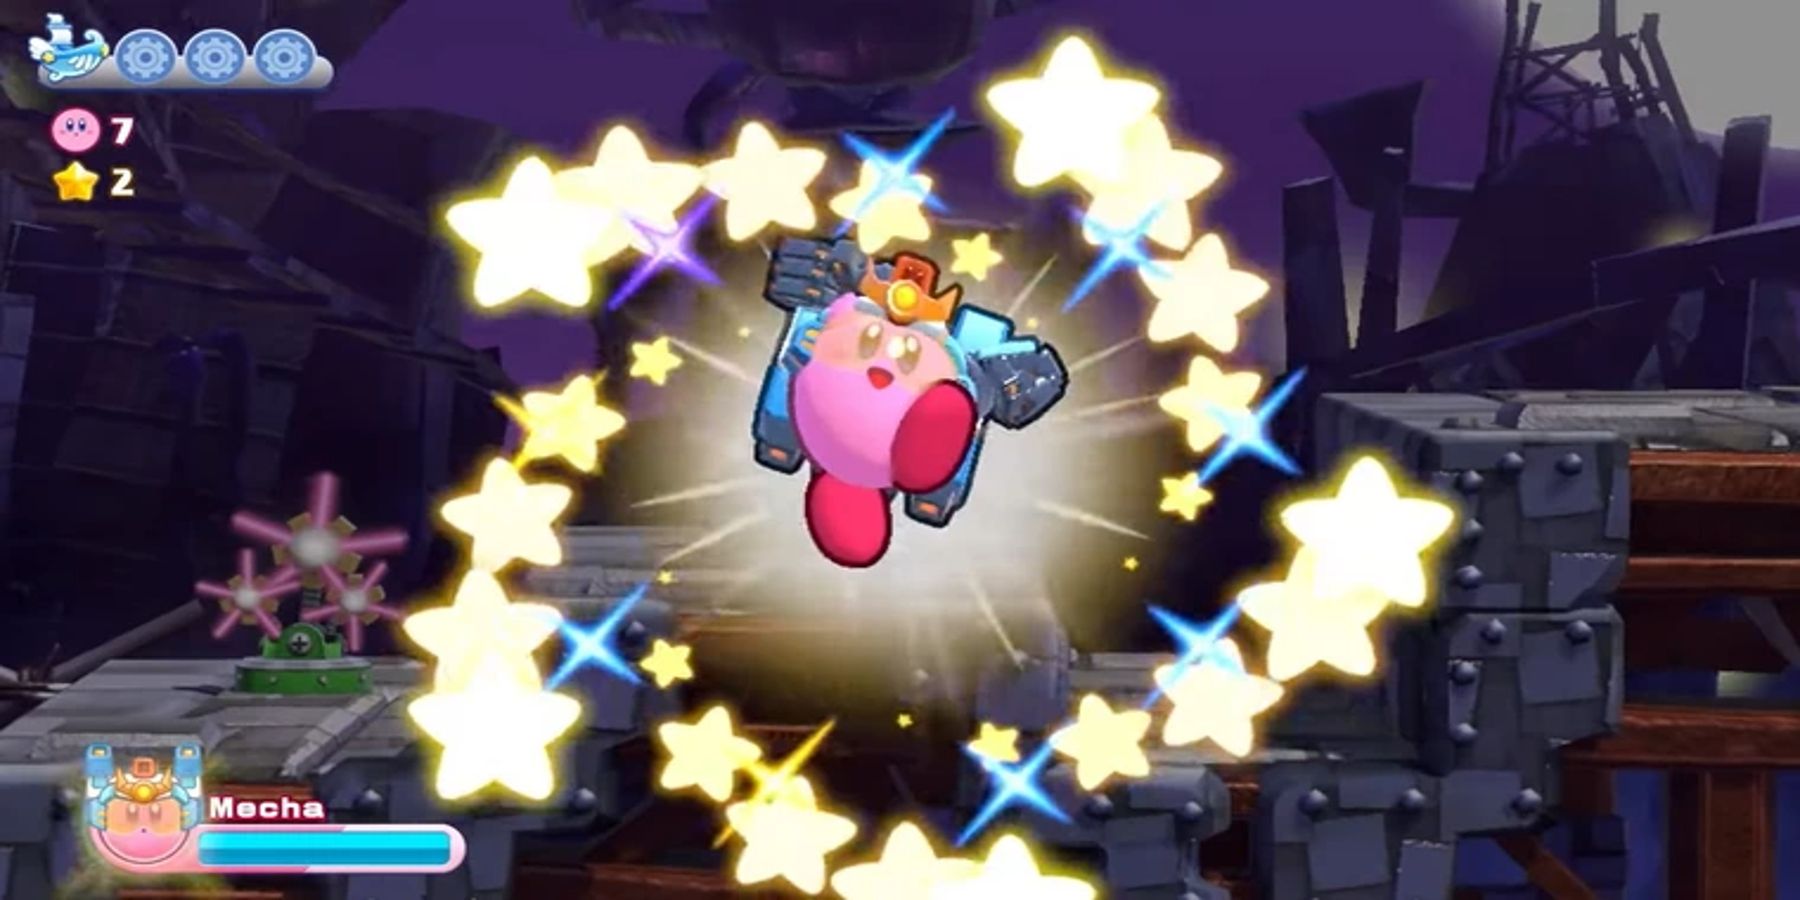 The new copy ability Mecha introduced in Kirby's Return to Dreamland Deluxe